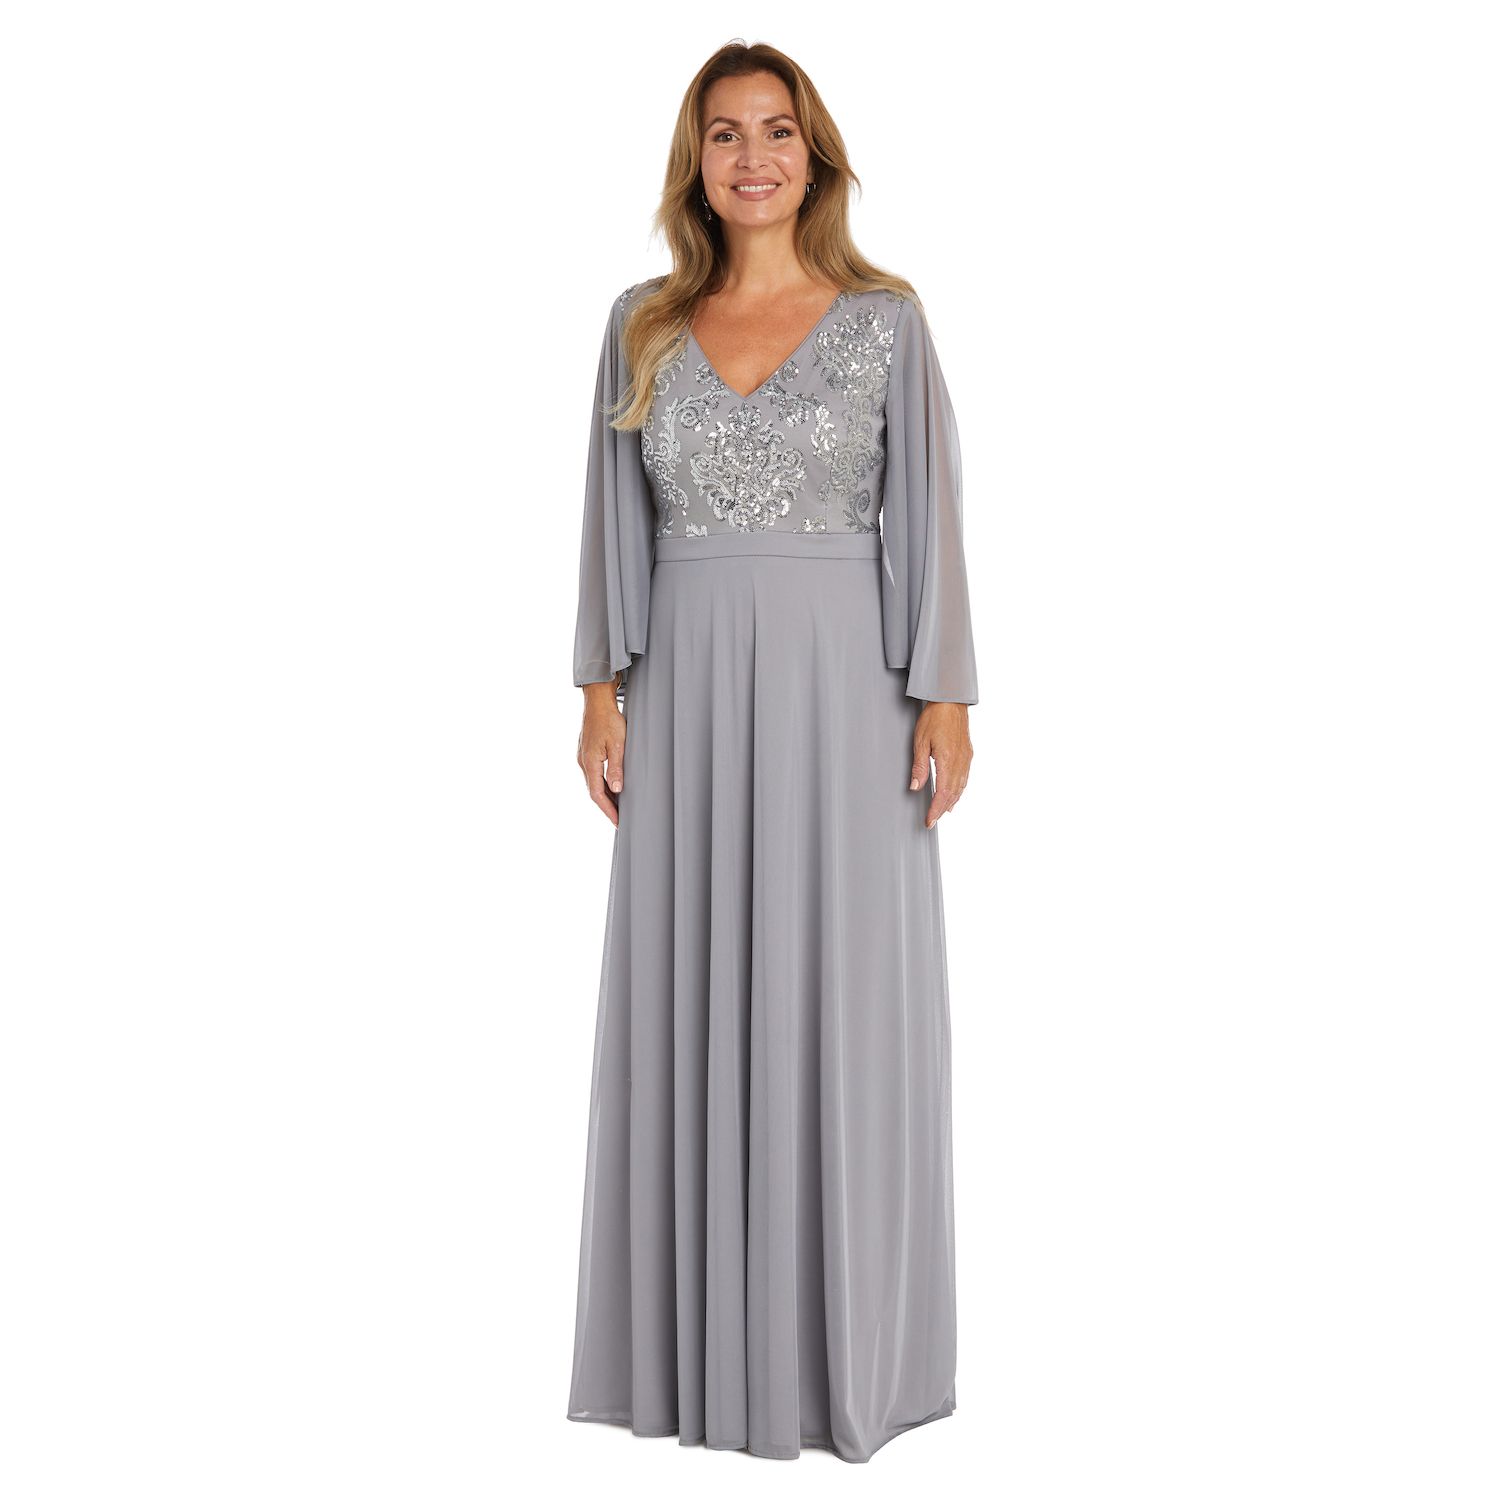 kohl’s mother of the bride dresses